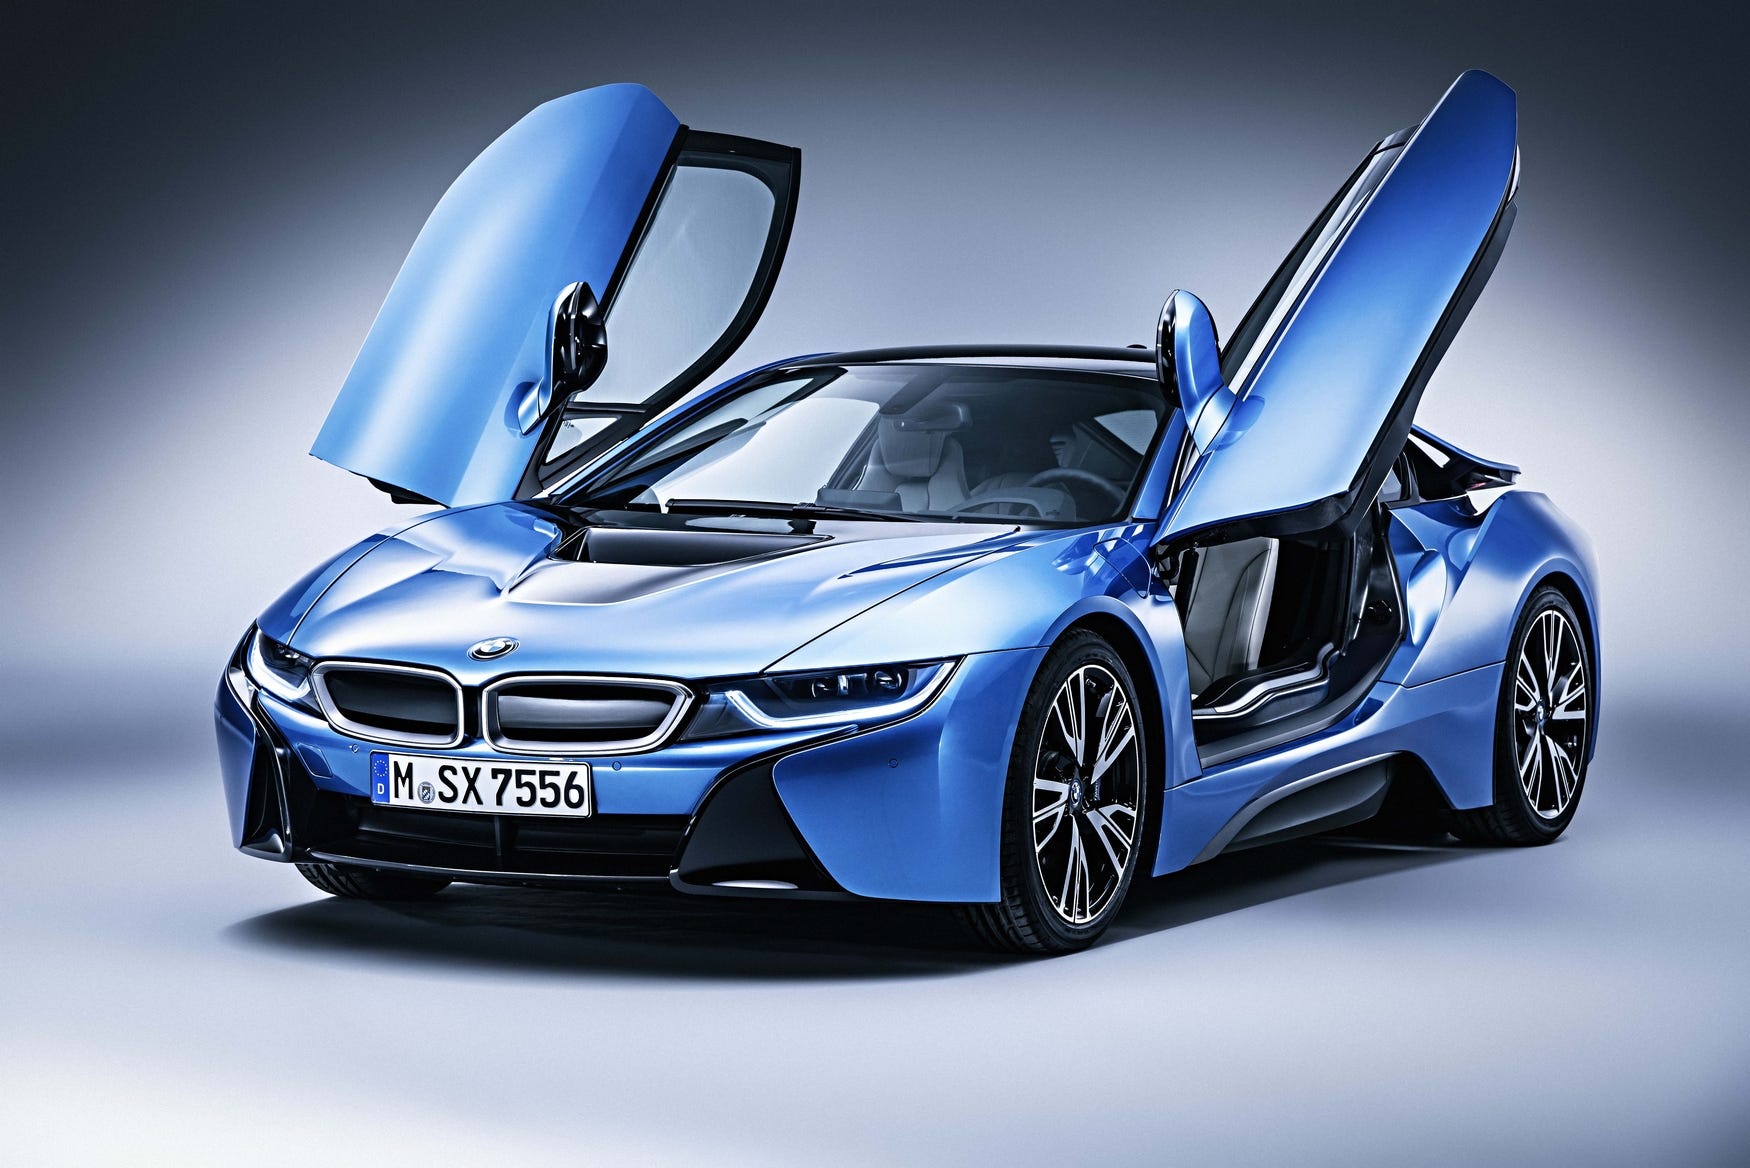 BMW i8: Practicality is not what it's about